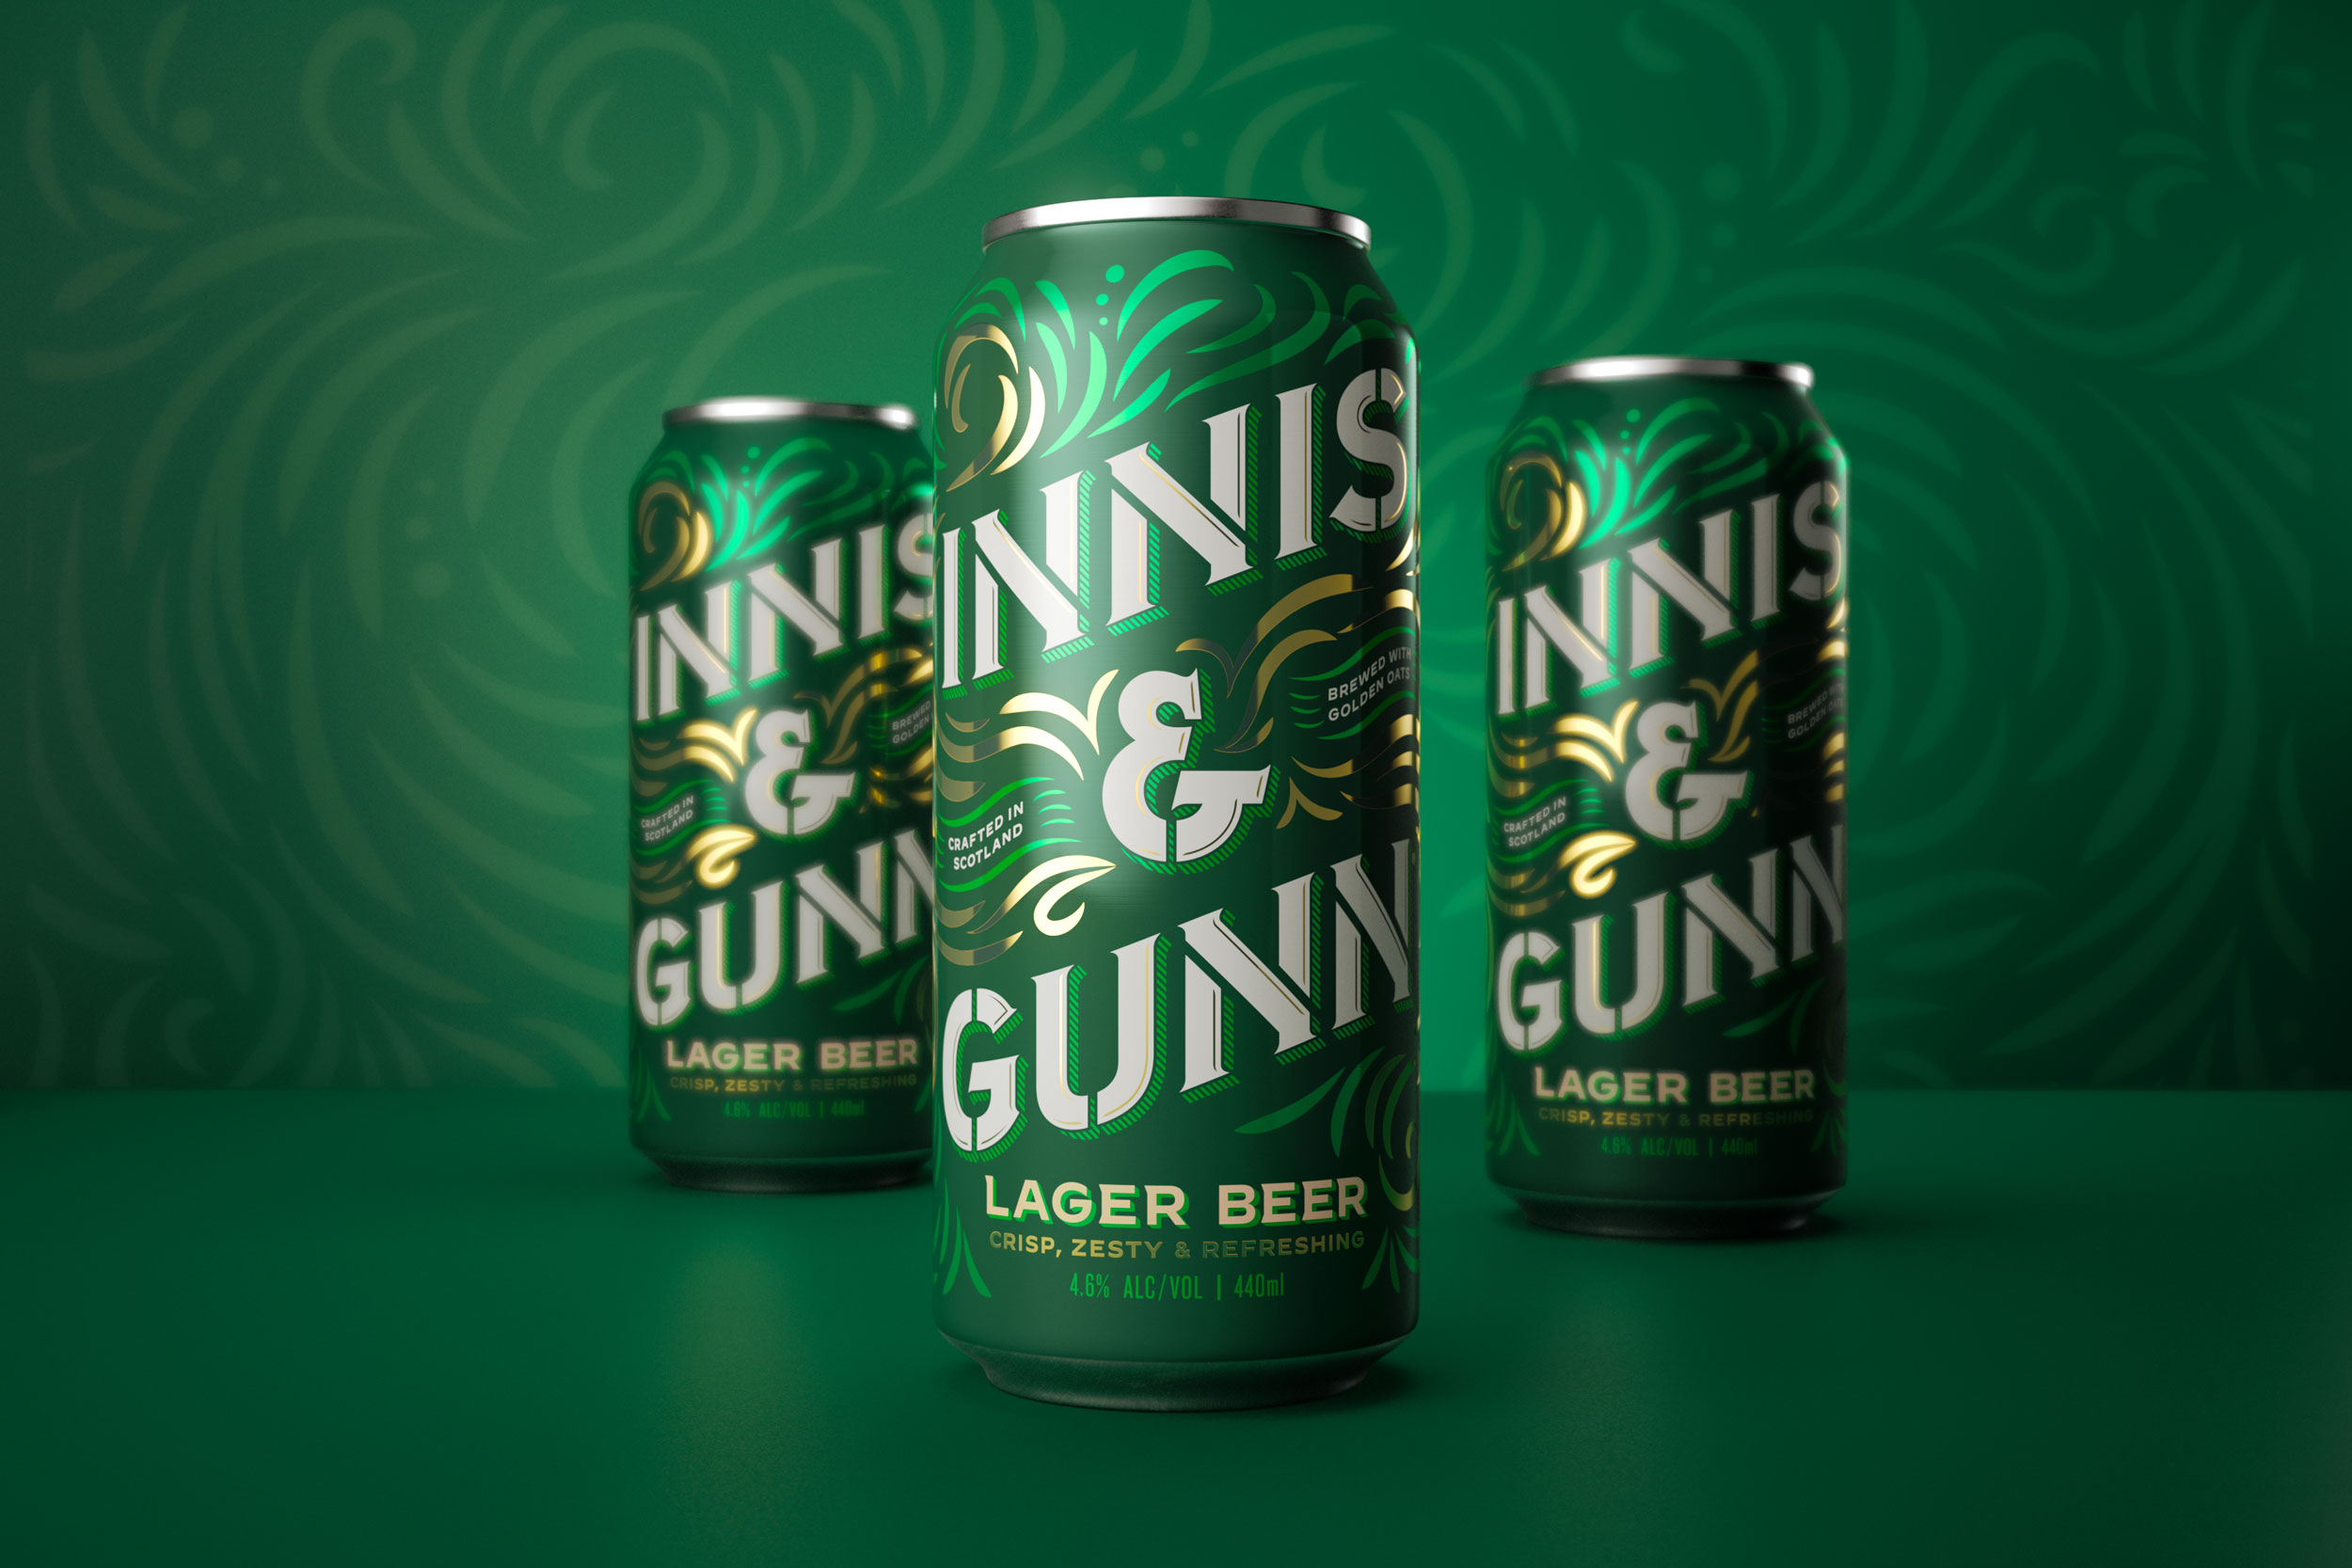 Thirst Gives Innis and Gunn’s Craft Range a Refreshingly Original New Look